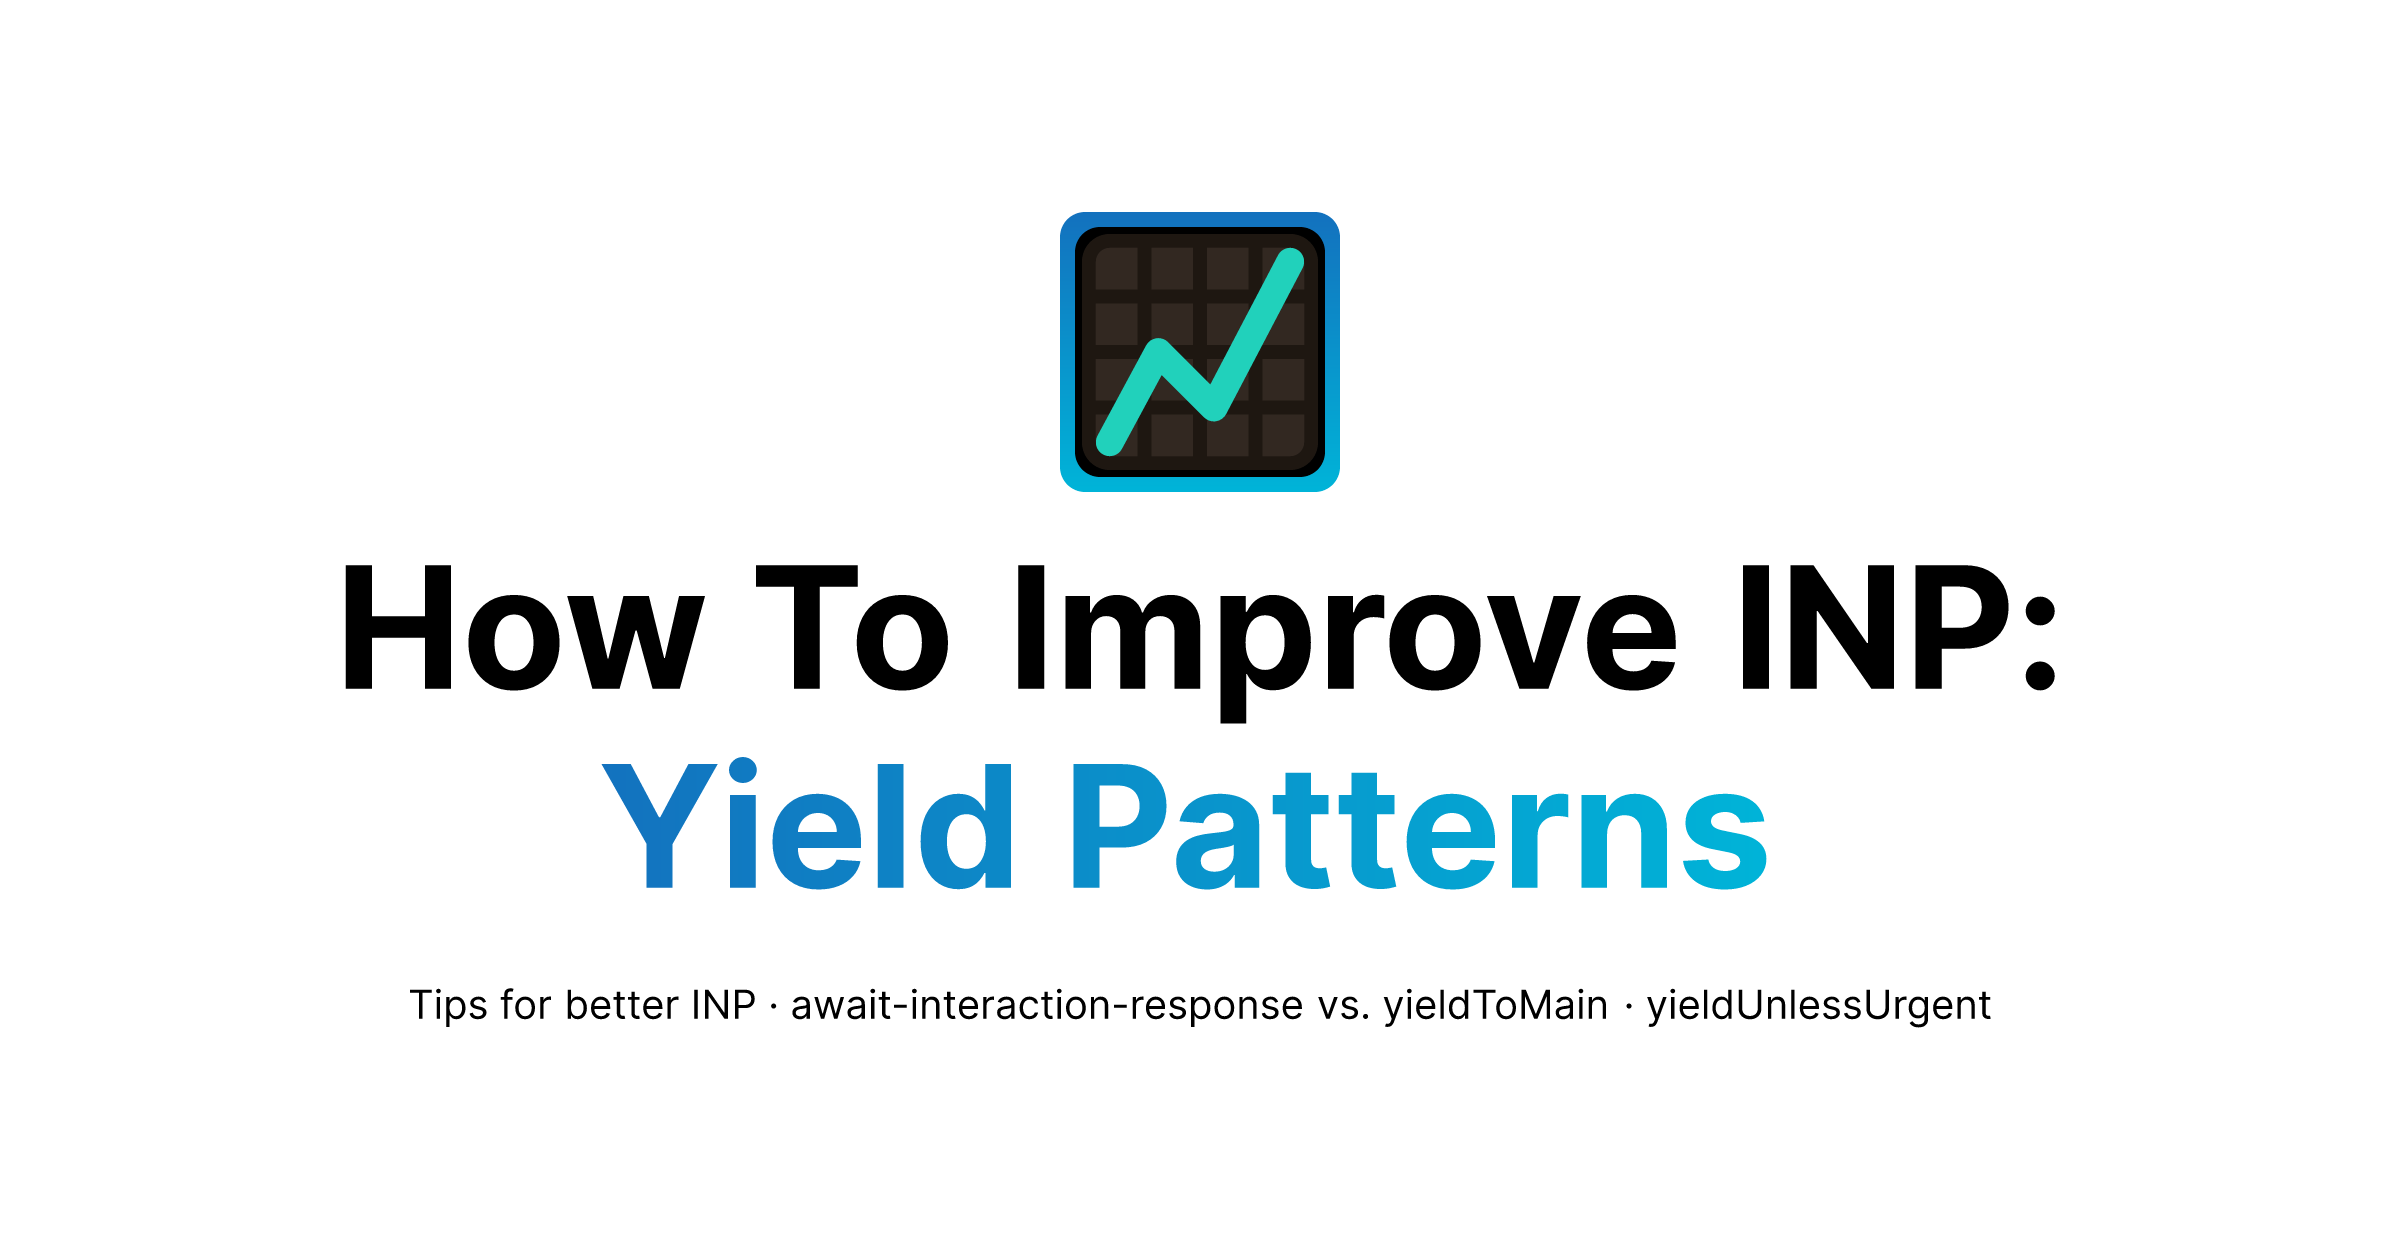 How To Improve INP: Yield Patterns